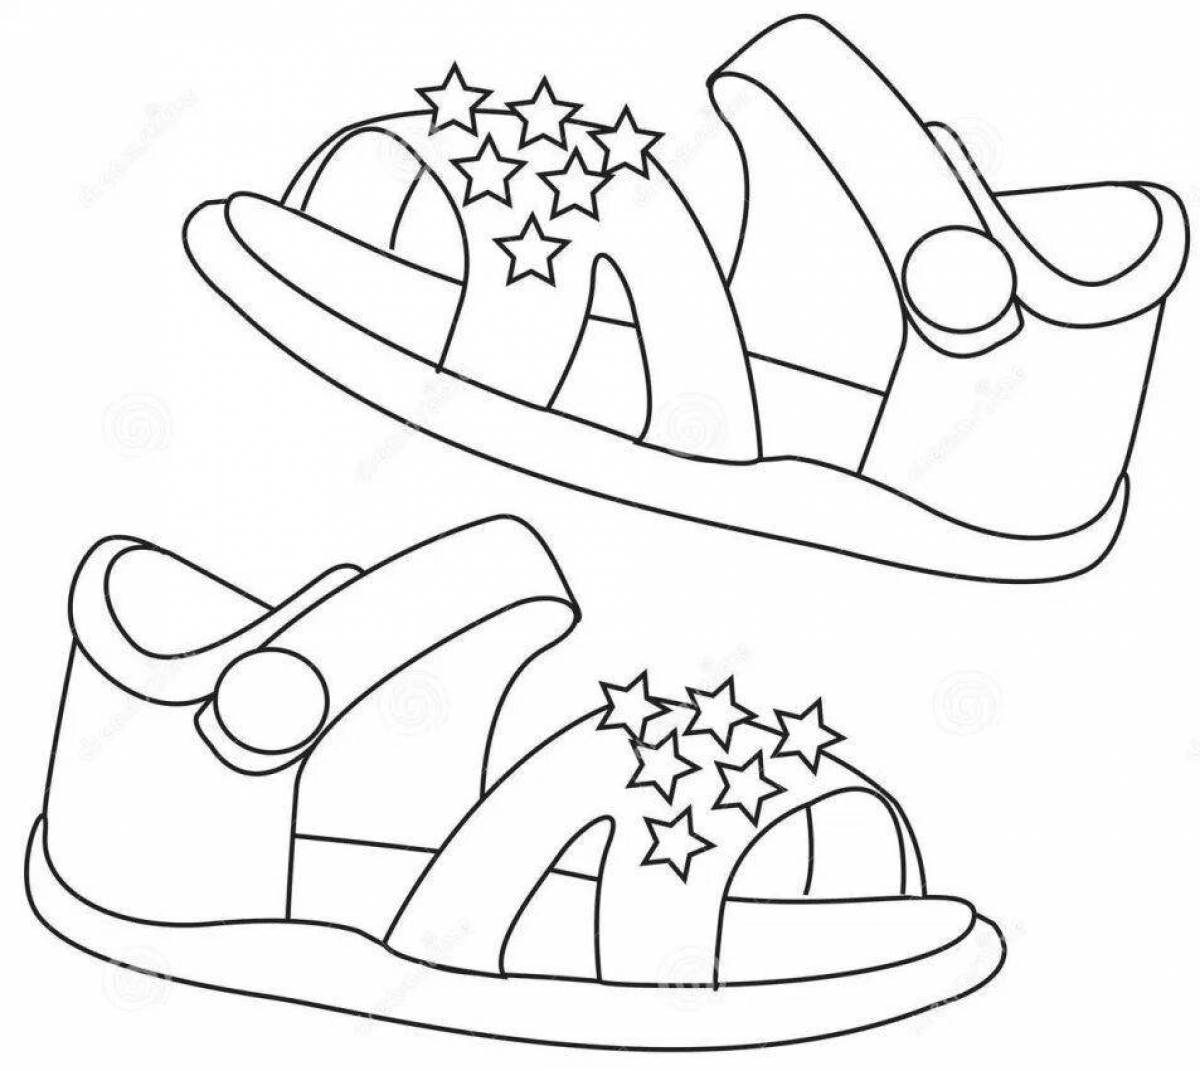 Adorable shoe coloring book for 2-3 year olds